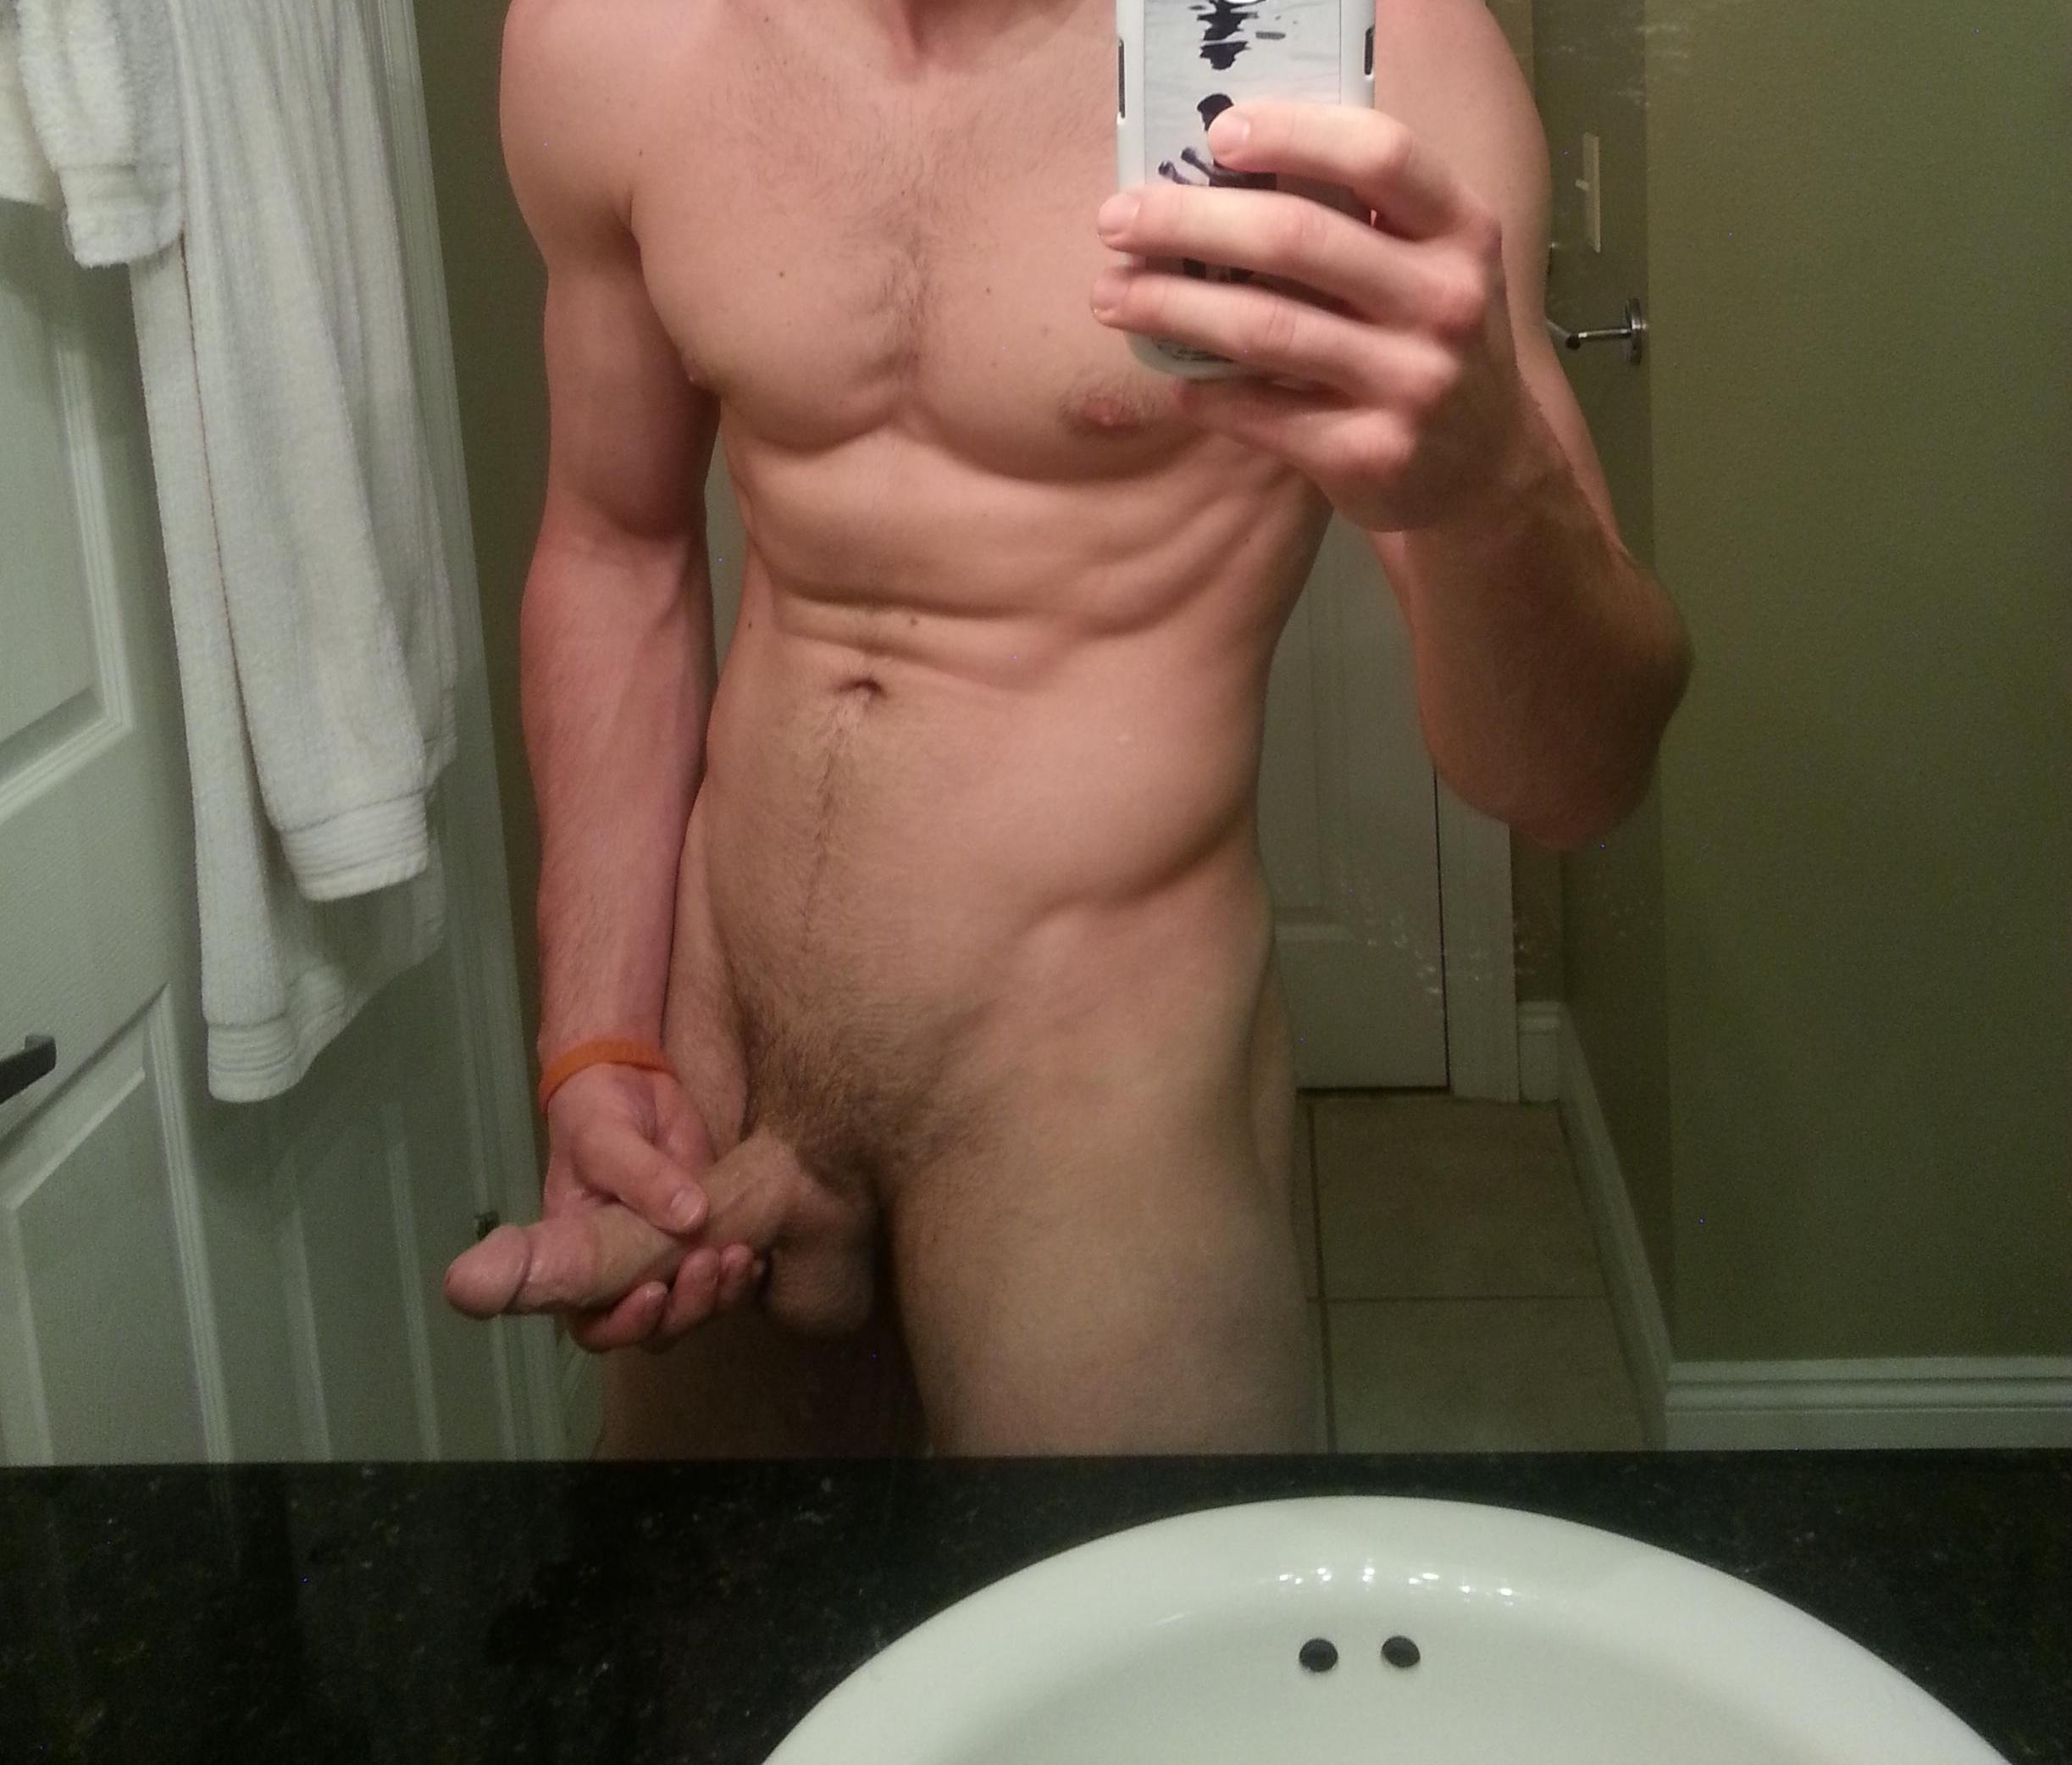 Now accepting applications for cute hairy boyfriend to deep throat this cock